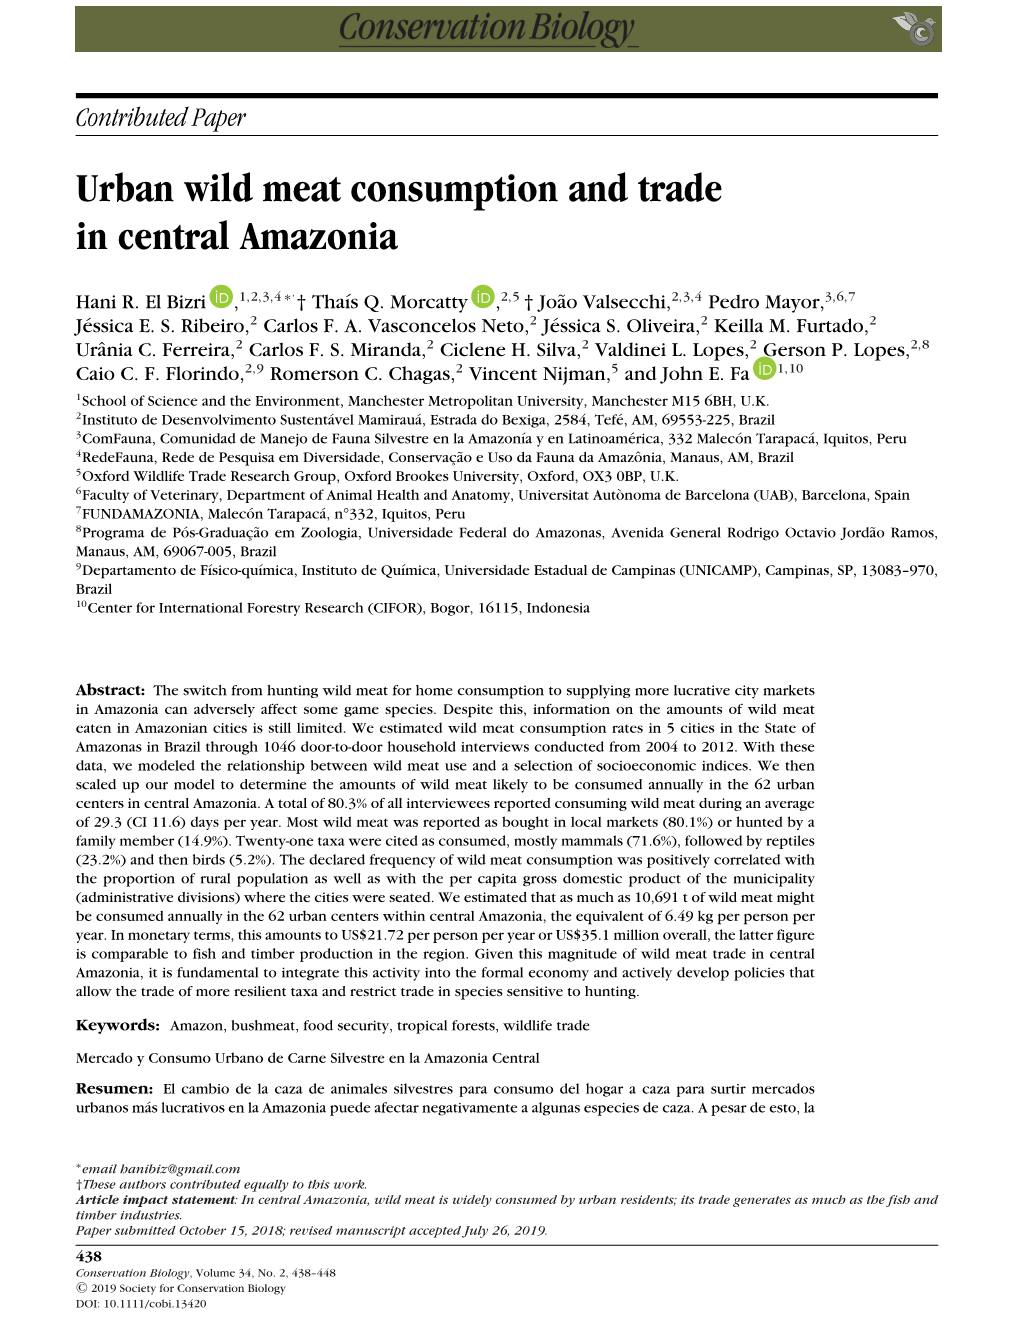 Urban Wild Meat Consumption and Trade in Central Amazonia